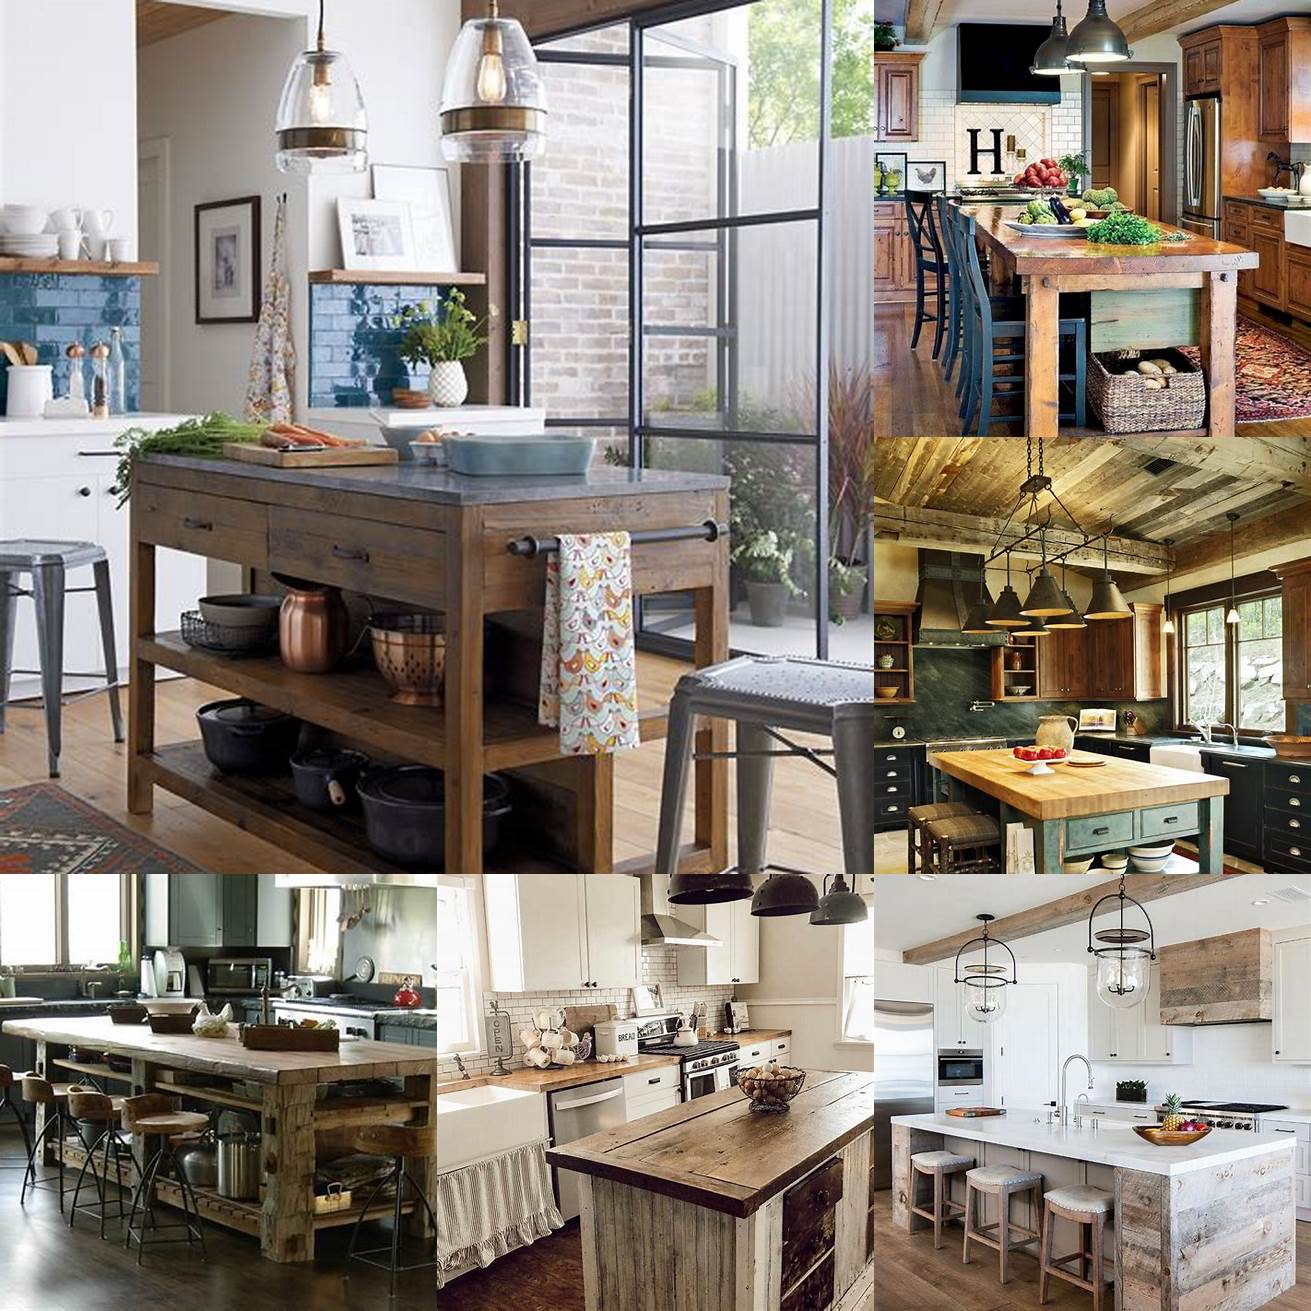 A rustic kitchen island with a wooden countertop and open shelves